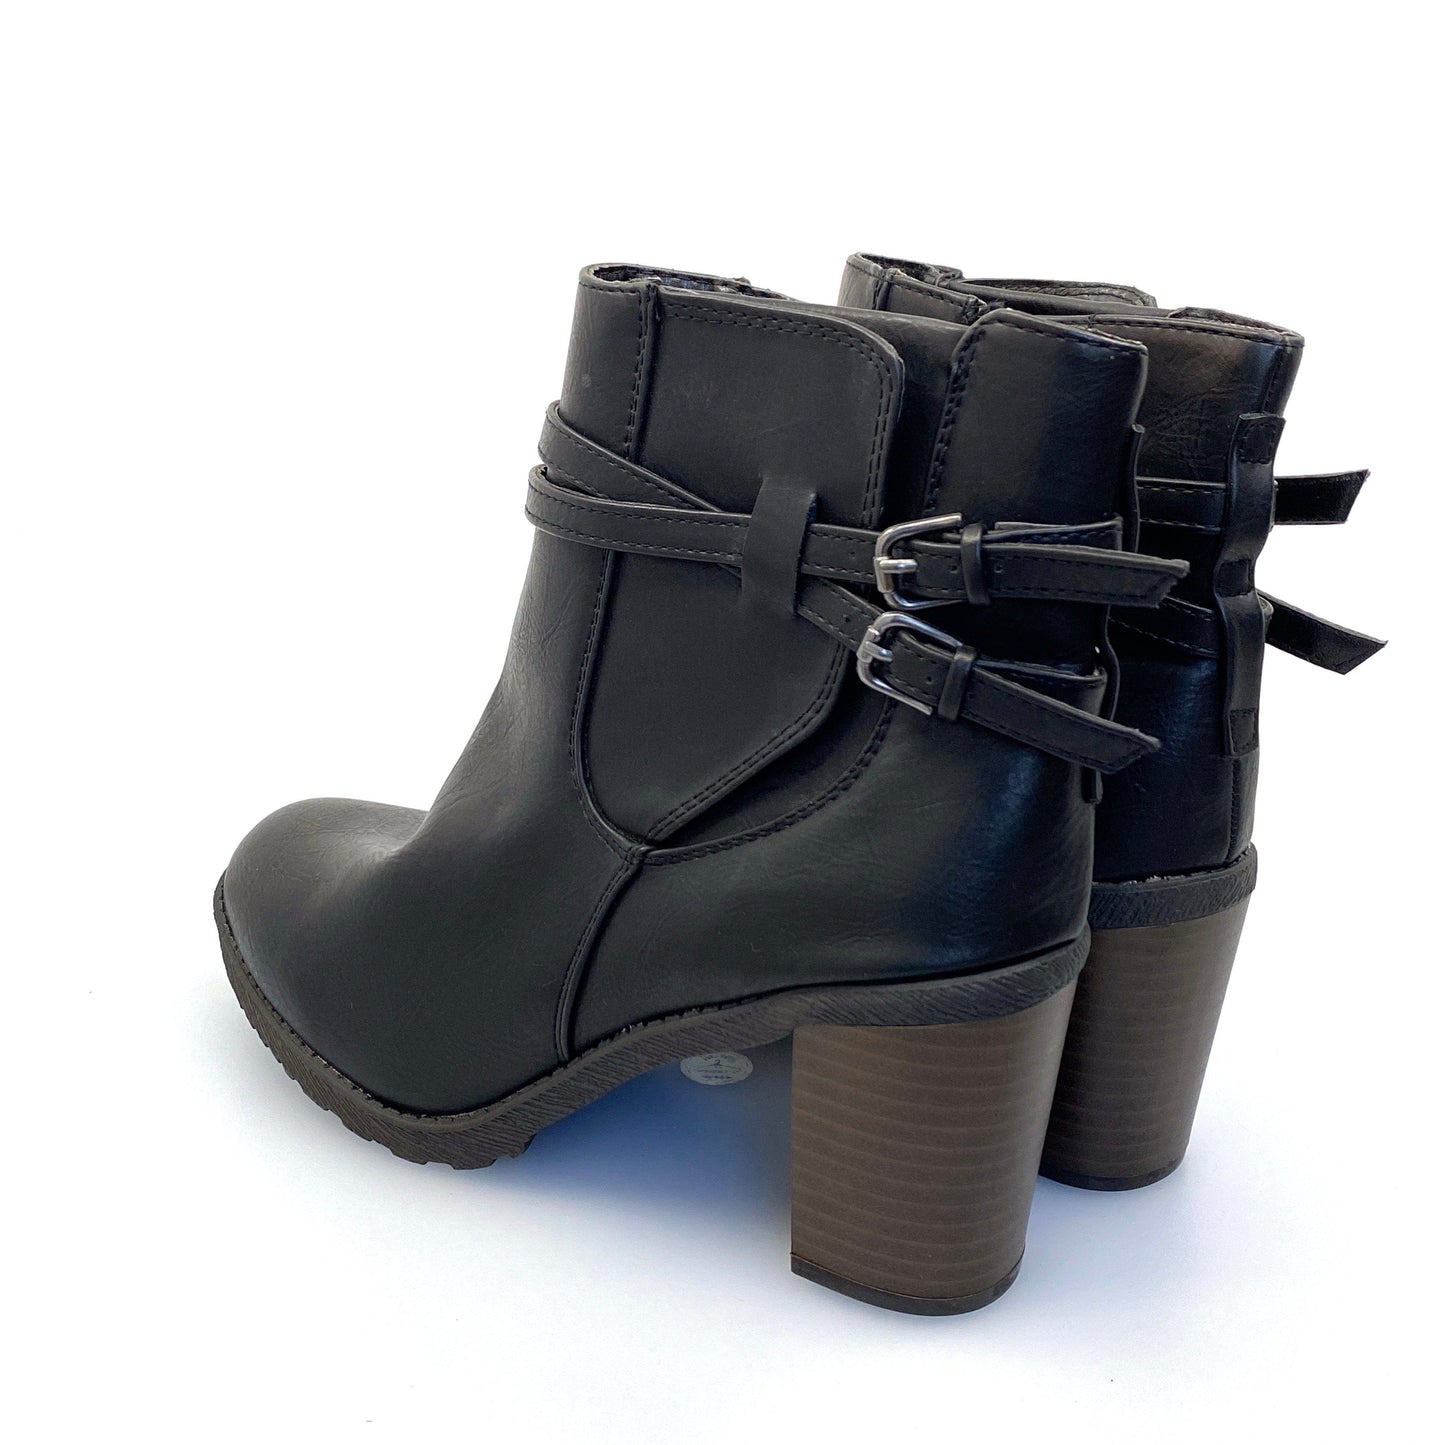 NWT Diba Womens ‘Shelby’ Size 7.5M Black Size-Zip Booties